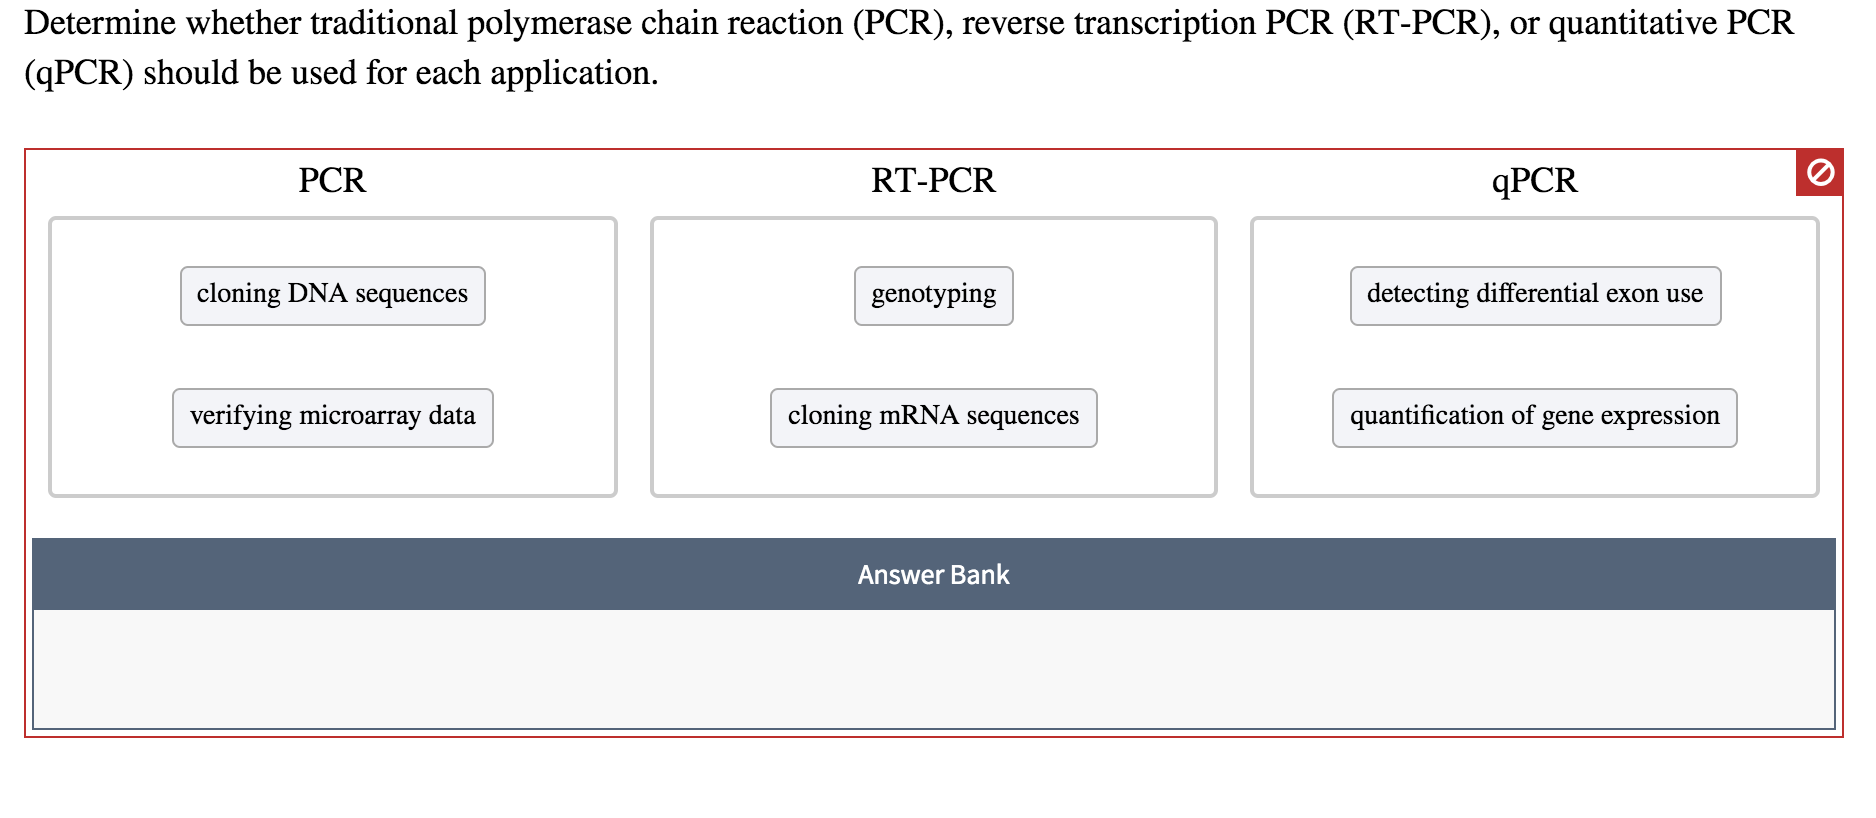 Determine whether traditional polymerase chain reaction (PCR), reverse transcription PCR (RT-PCR), or quantitative PCR
(qPCR) should be used for each application
PCR
RT-PCR
ДРCR
cloning DNA sequences
detecting differential exon use
genotyping
cloning MRNA sequences
verifying microarray data
quantification of
gene expression
Answer Bank
о
